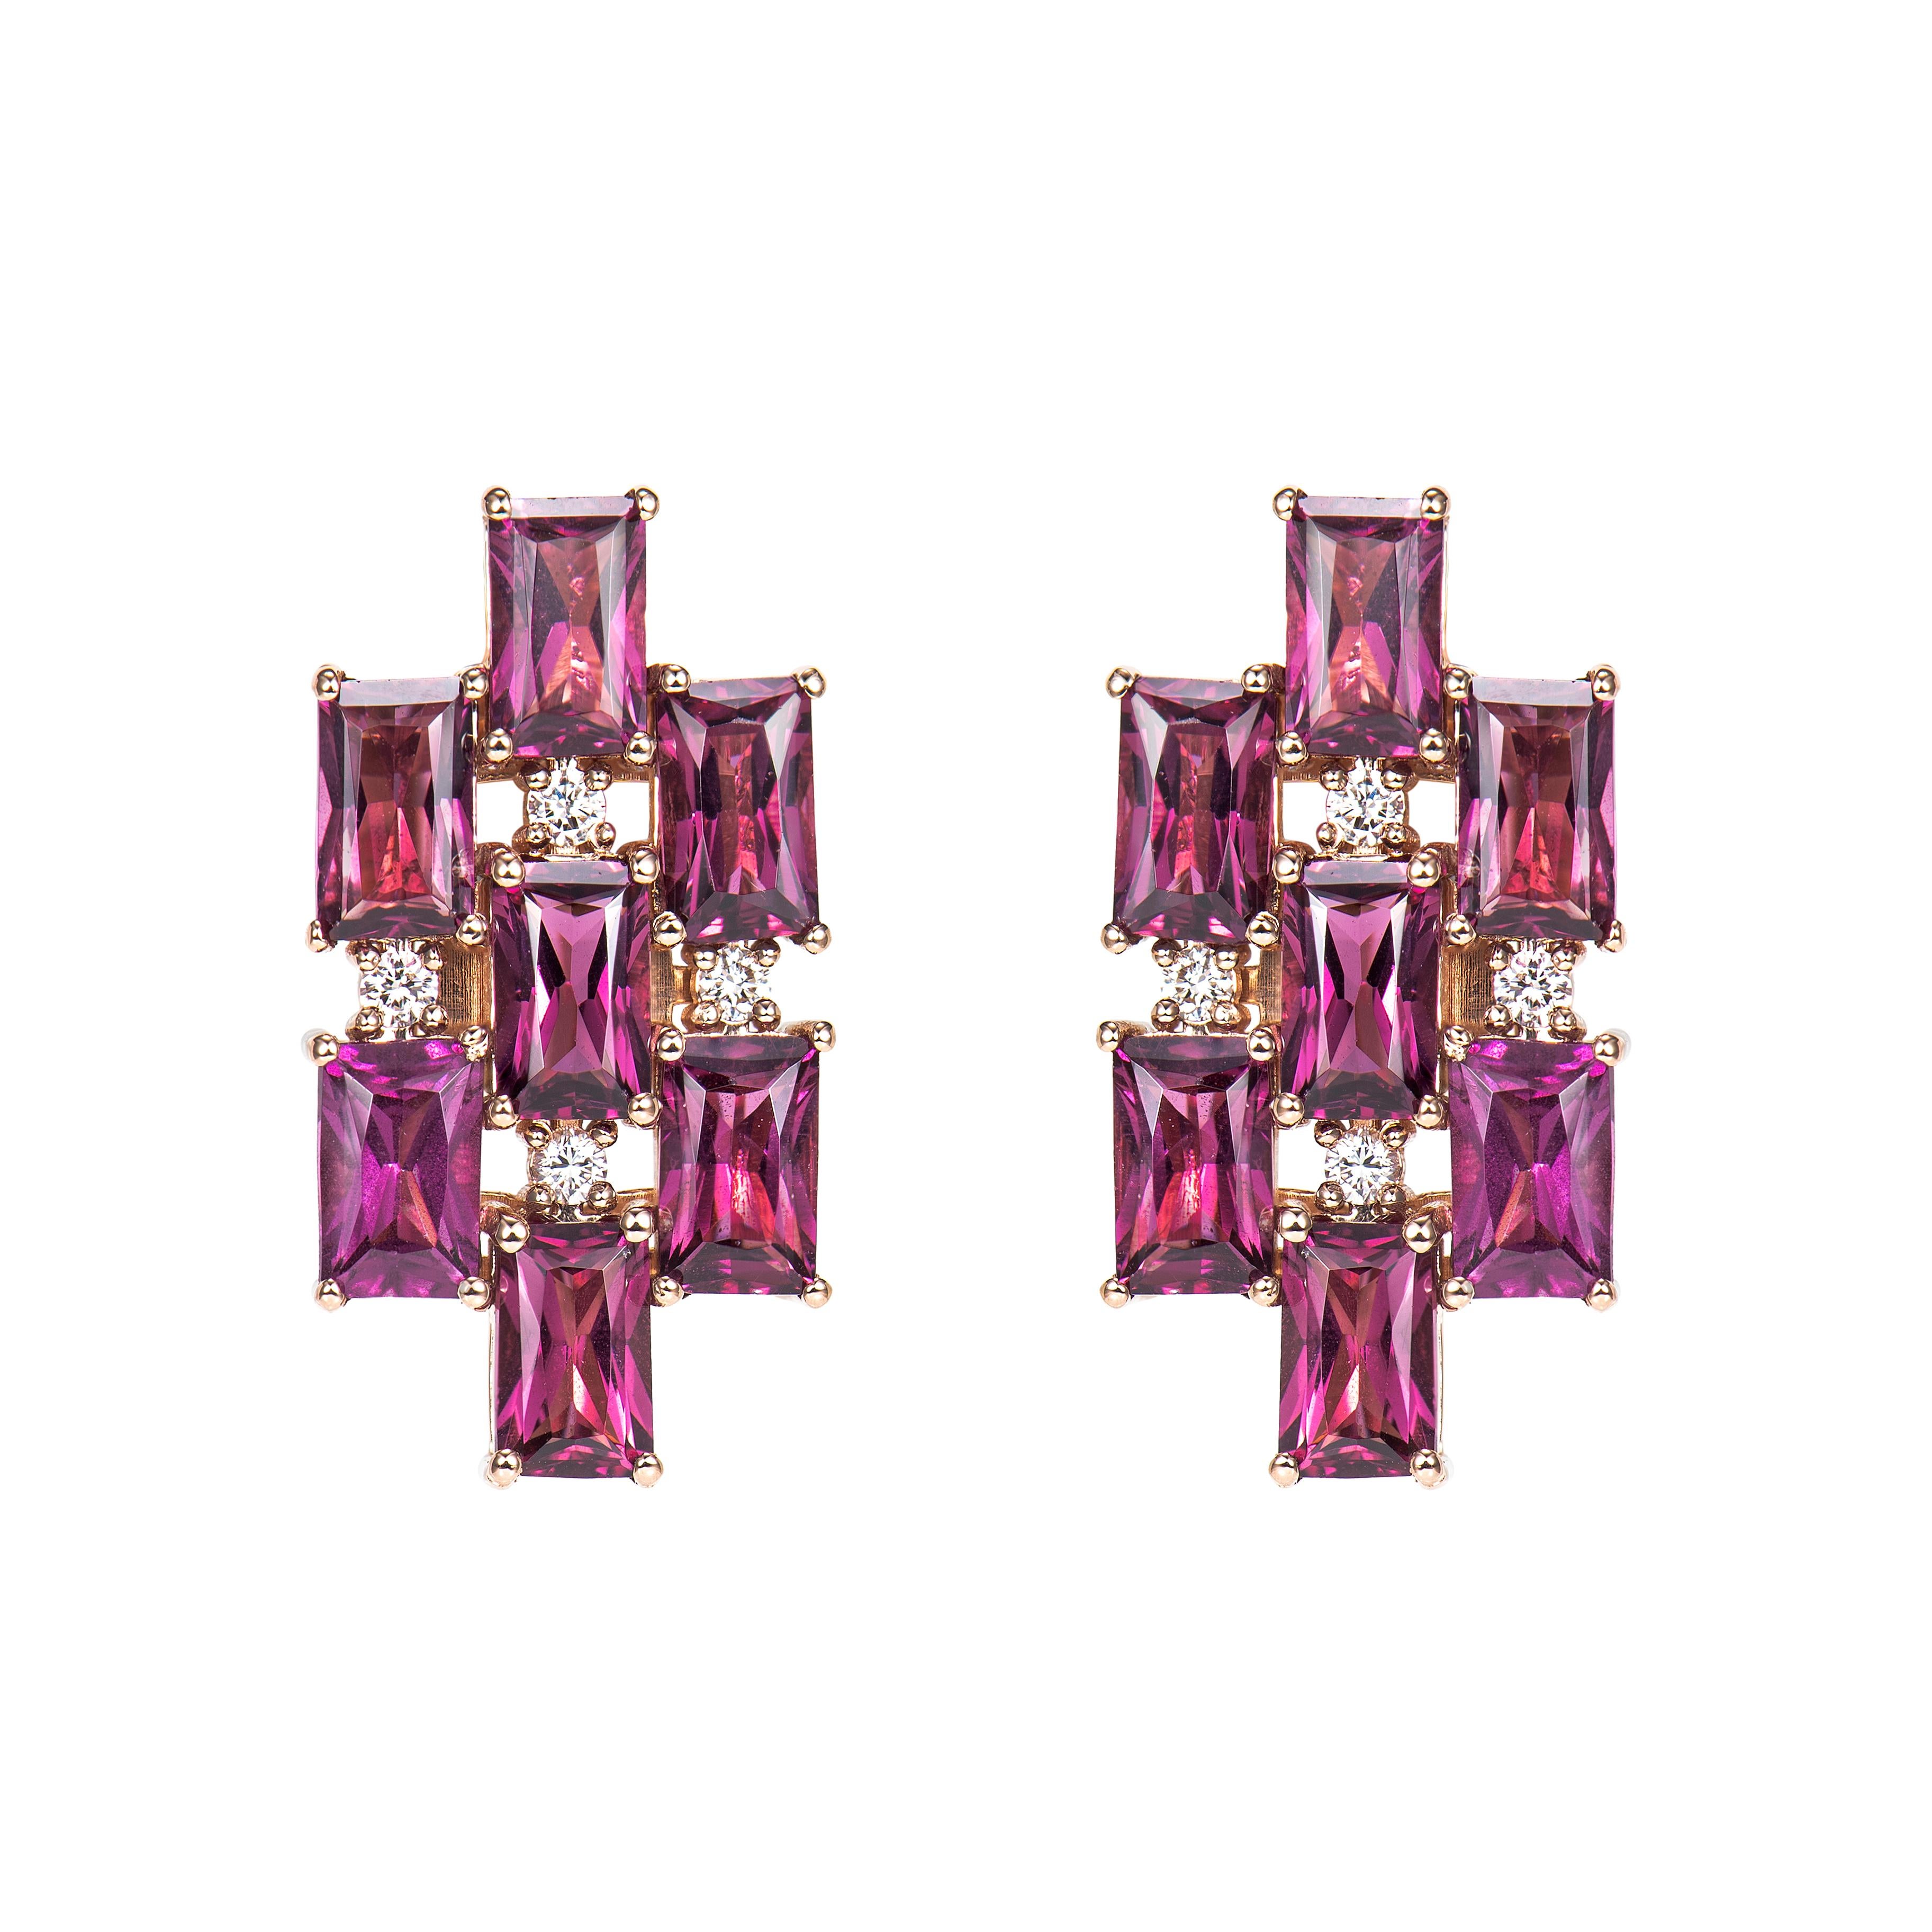 Contemporary 5.30 Carat Rhodolite Drop Earring in 18Karat Rose Gold with White Diamond. For Sale